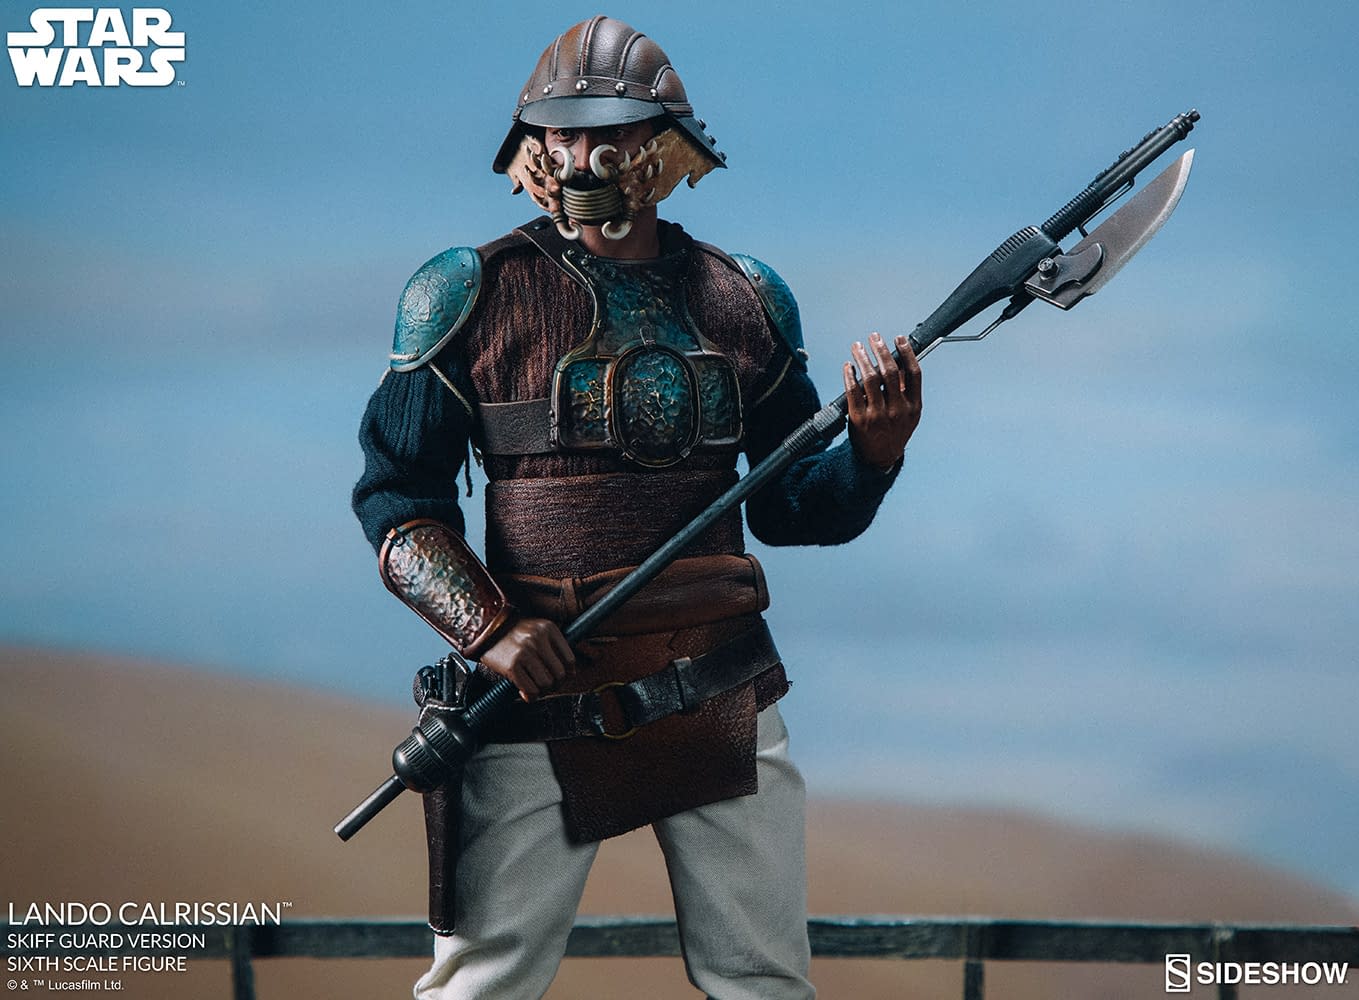 Lando Calrissian Arrives with New Sideshow Collectibles Star Wars Figure